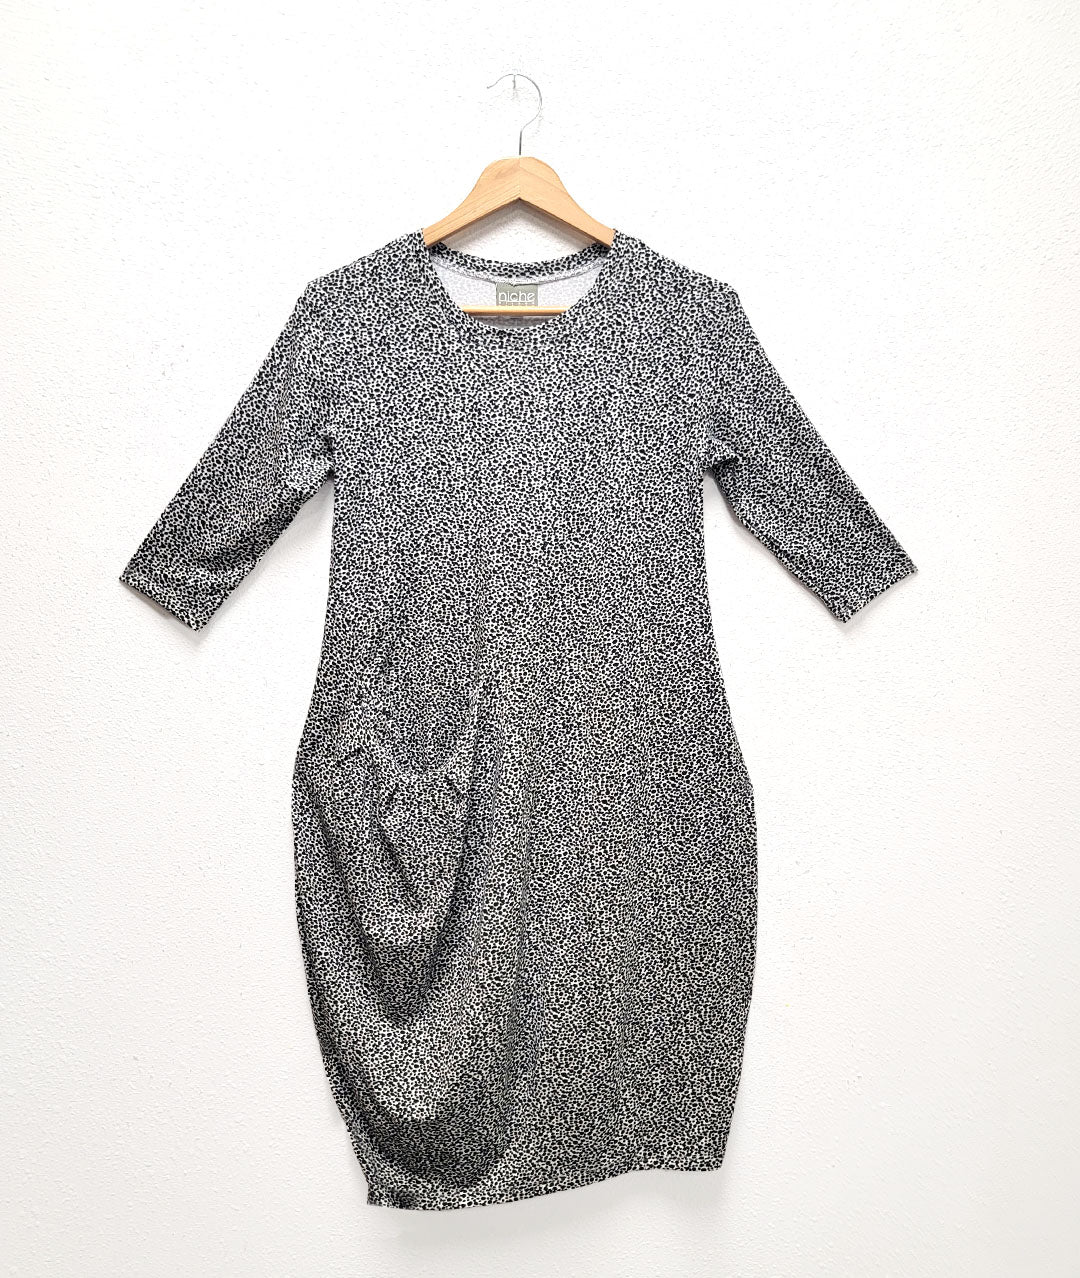 black and white speckle print pullover tunic with a black dot print. dress has an asymmetrical seam across the front body with a curved pocket set into a seam at the hip. dress is knee lengh and has 3/4 sleeves and a round neckline